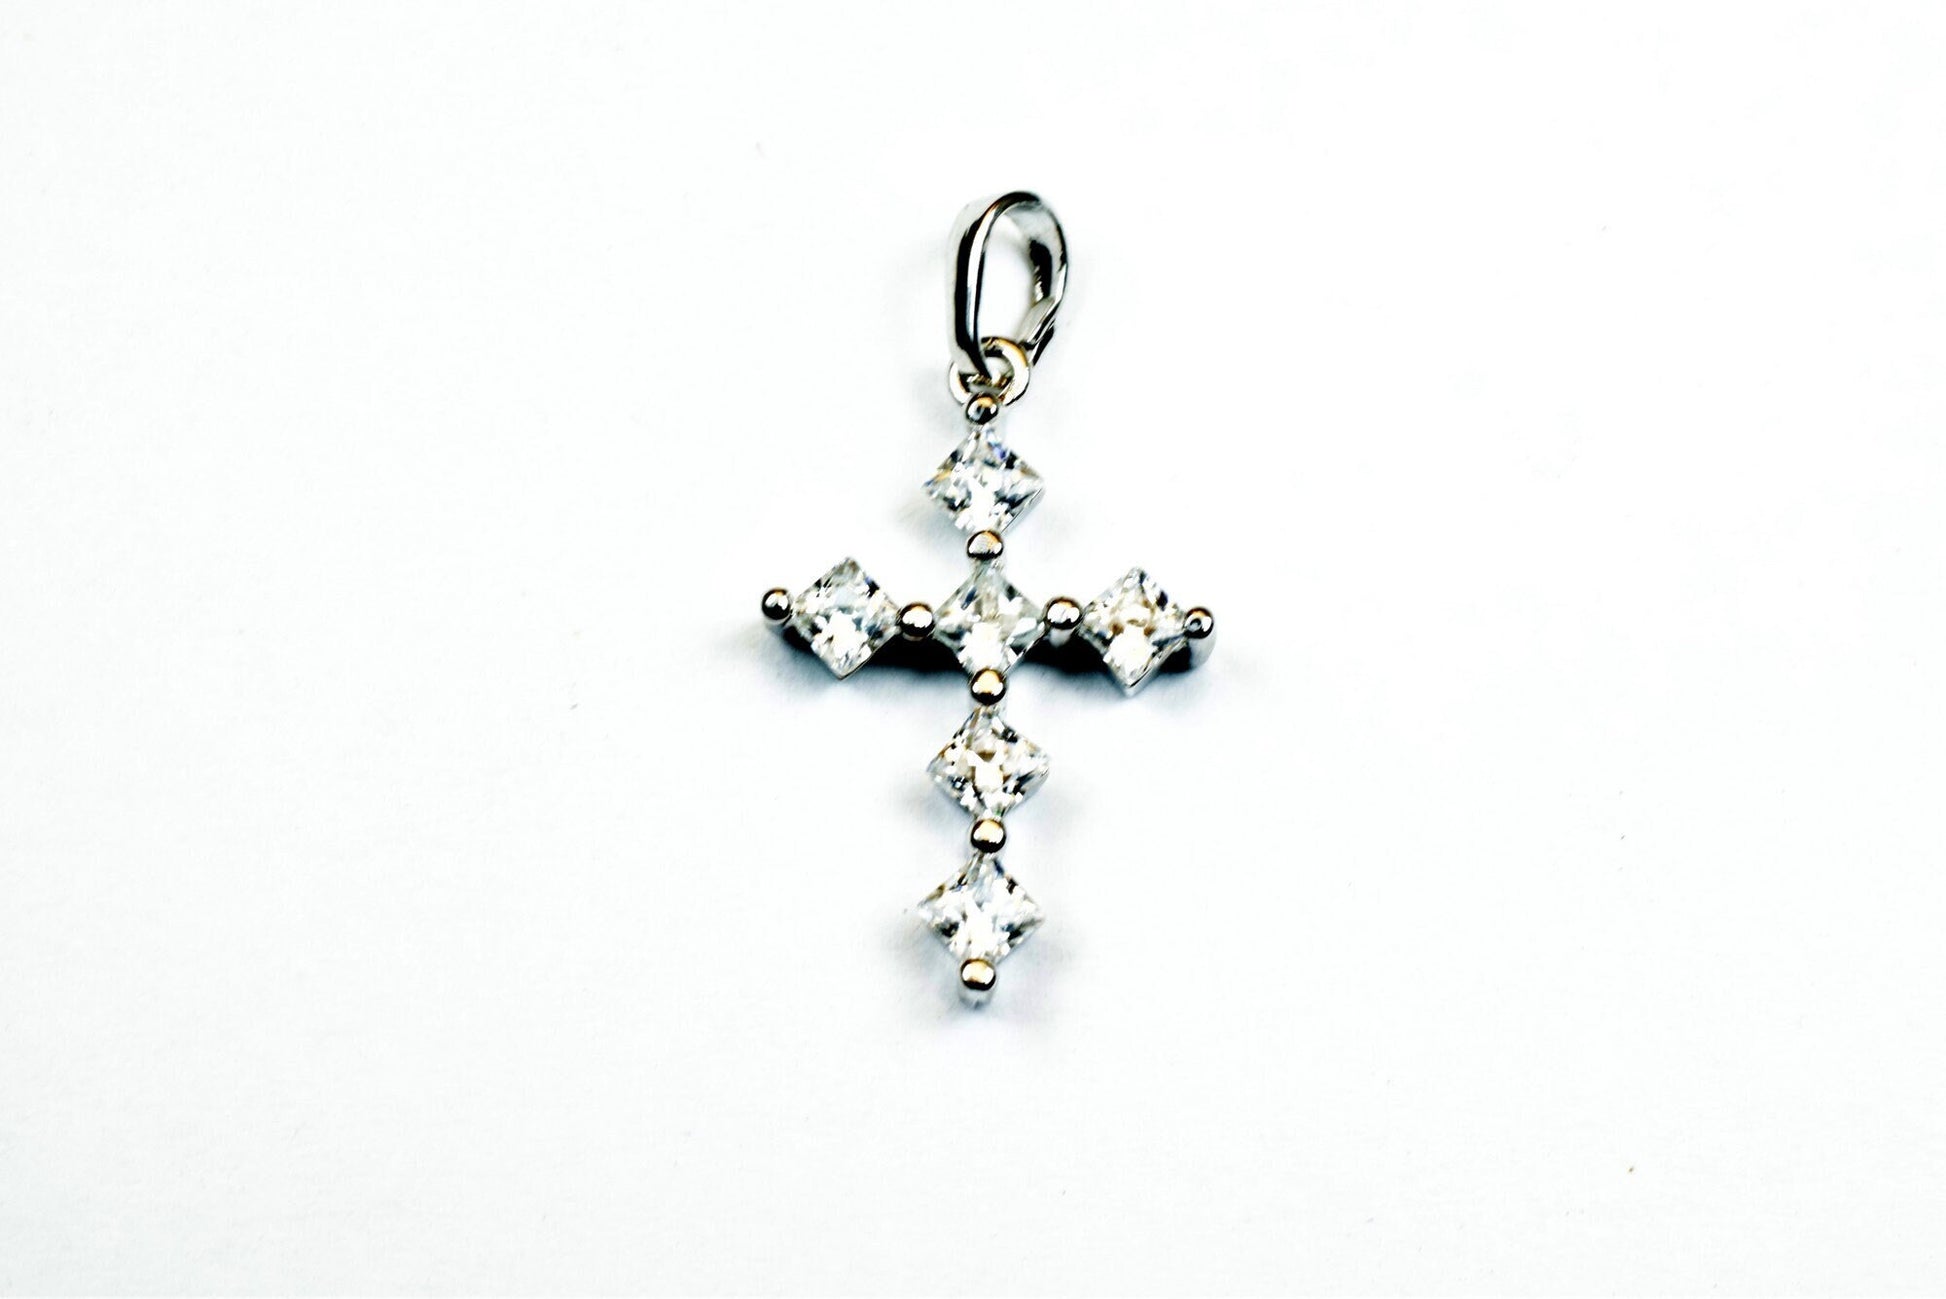 White gold filled cross pendant clear cz cubic zircon rhinestone rhodium plated charm size 22x15mm thickness 3mm findings for jewelry making